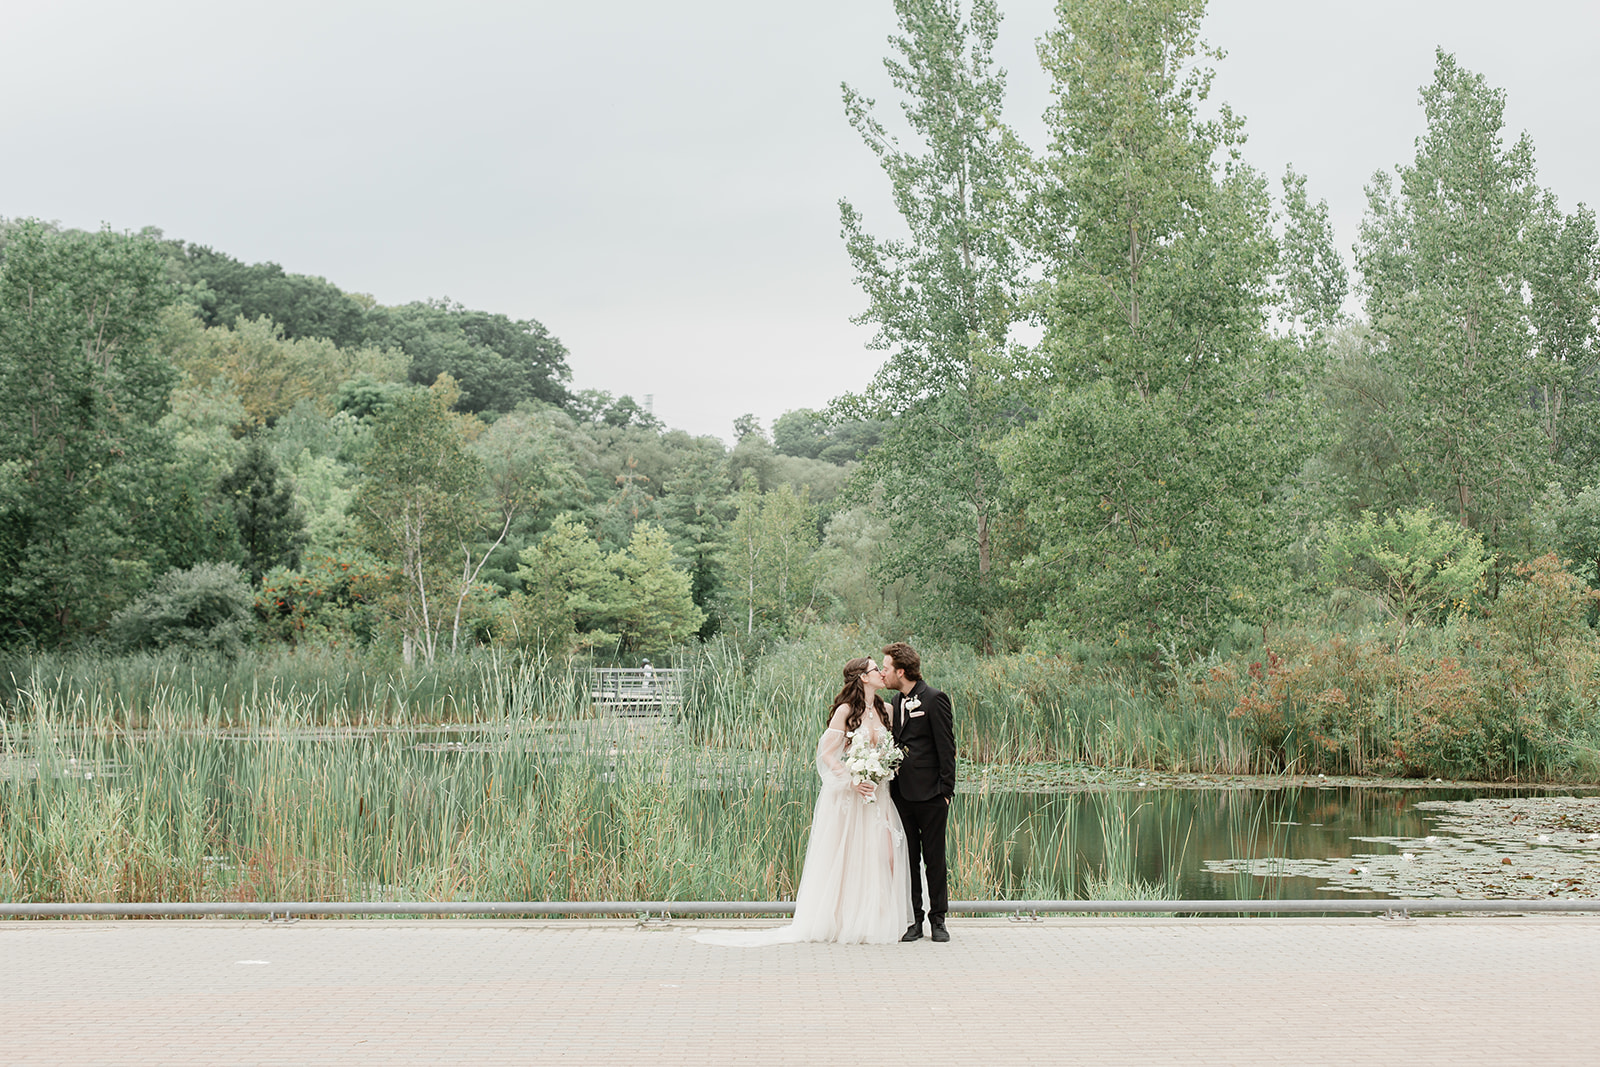 A couple kissing during their portrait session after their Toronto wedding ceremony at Evergreen Brick Works
